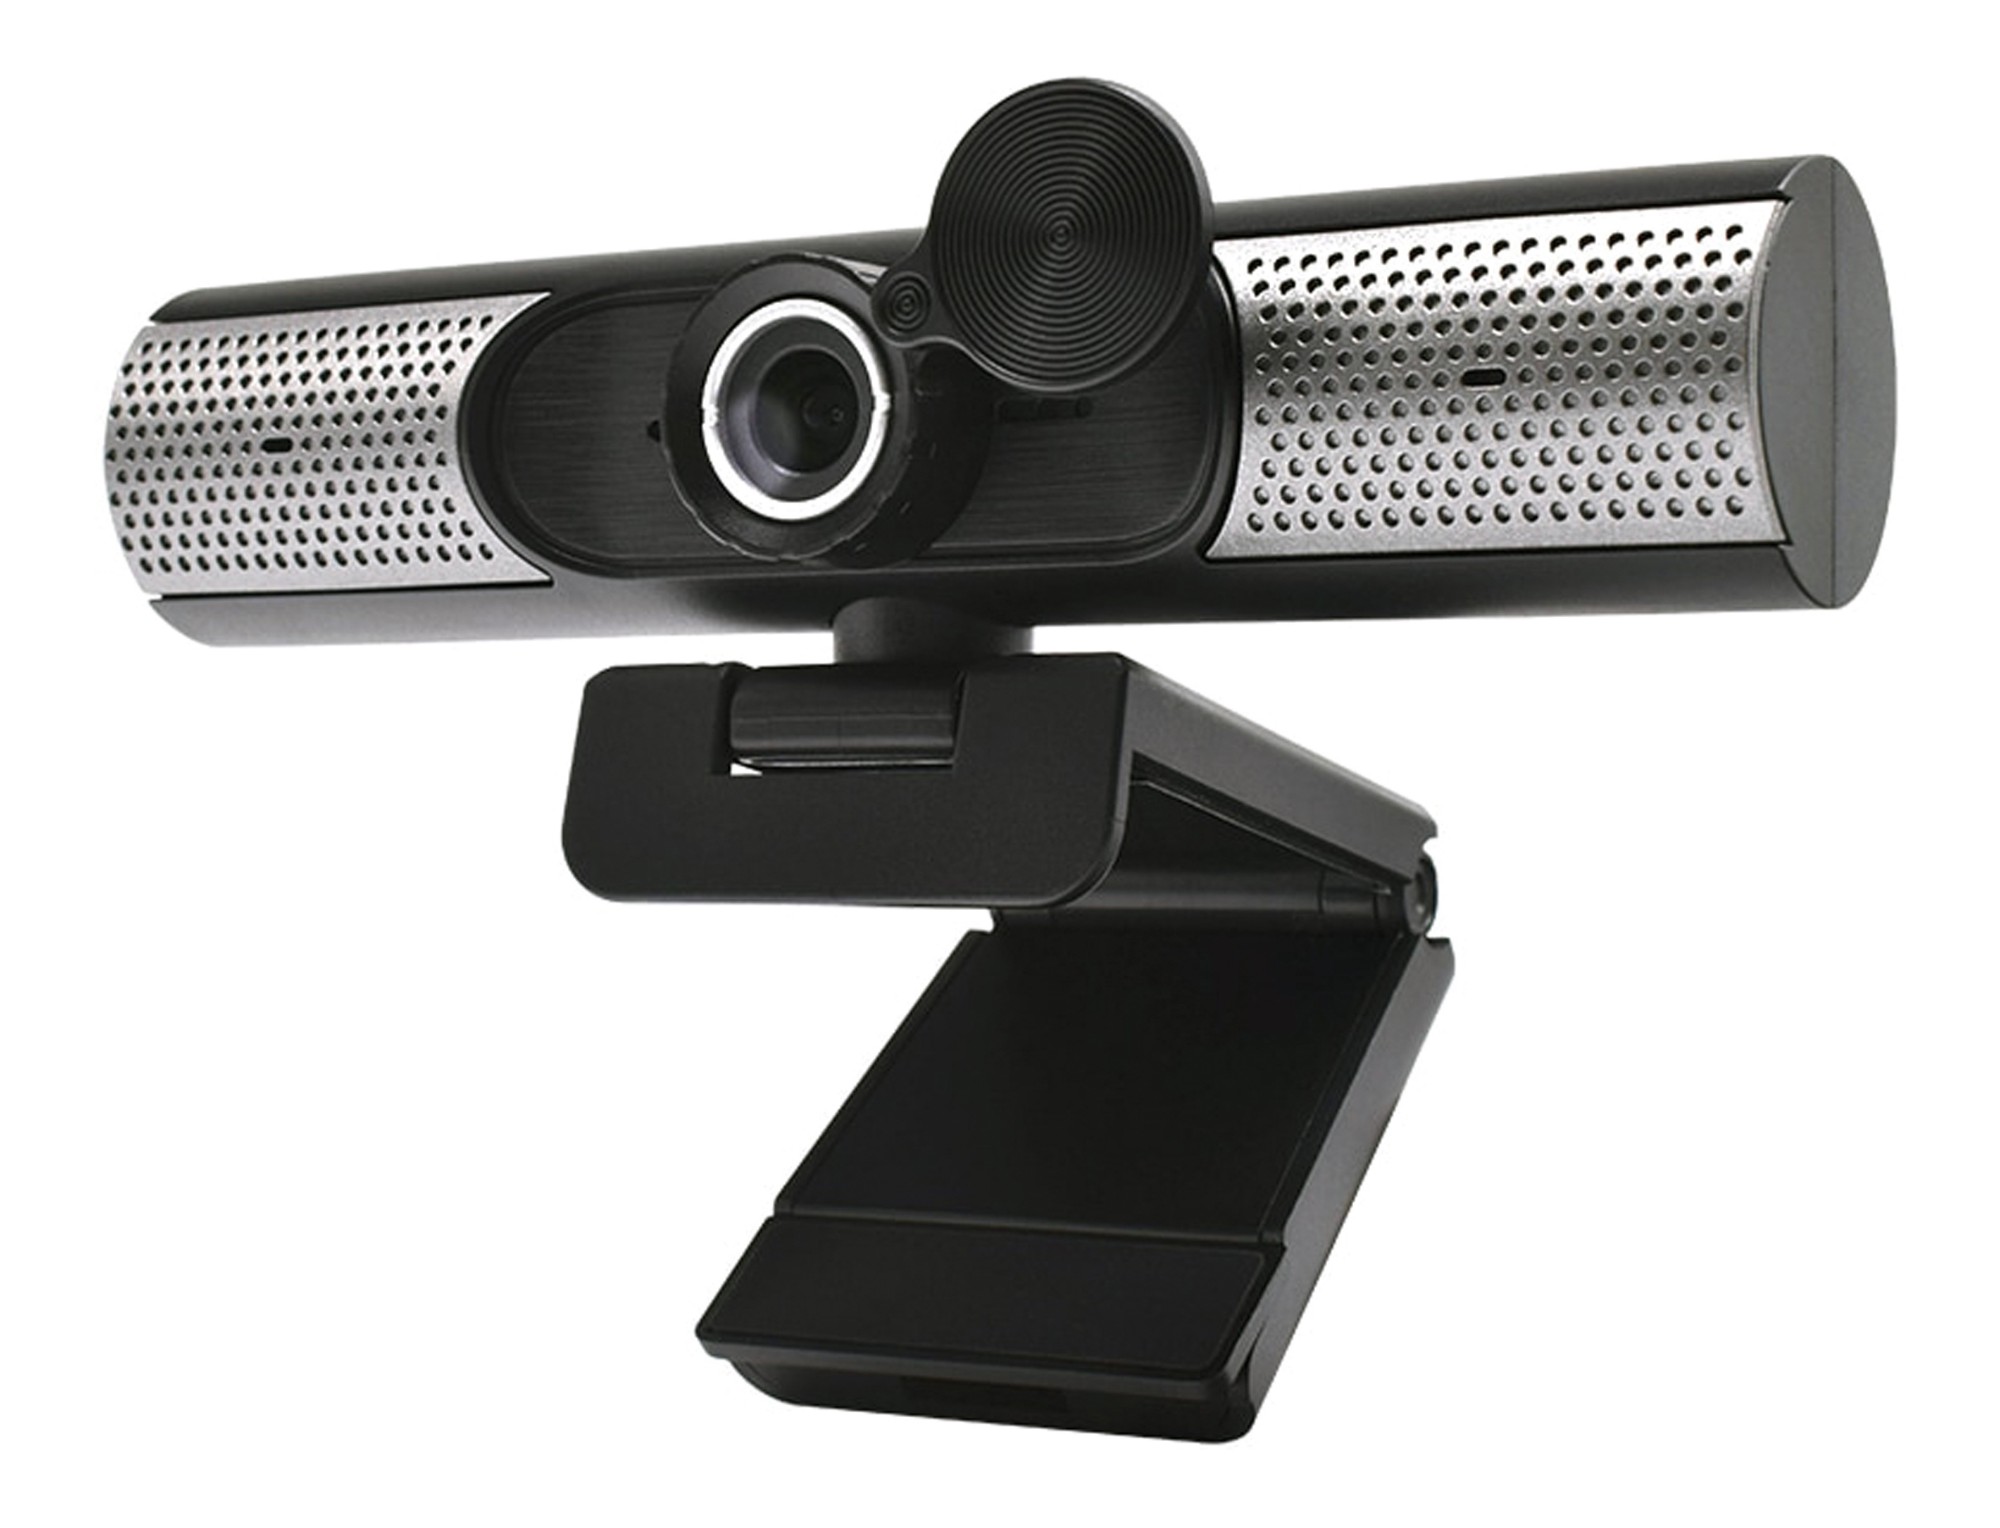 Photos - Webcam Platinet USB  , 1080p Full HD, Popular USB-A co PCW (with lens cover)